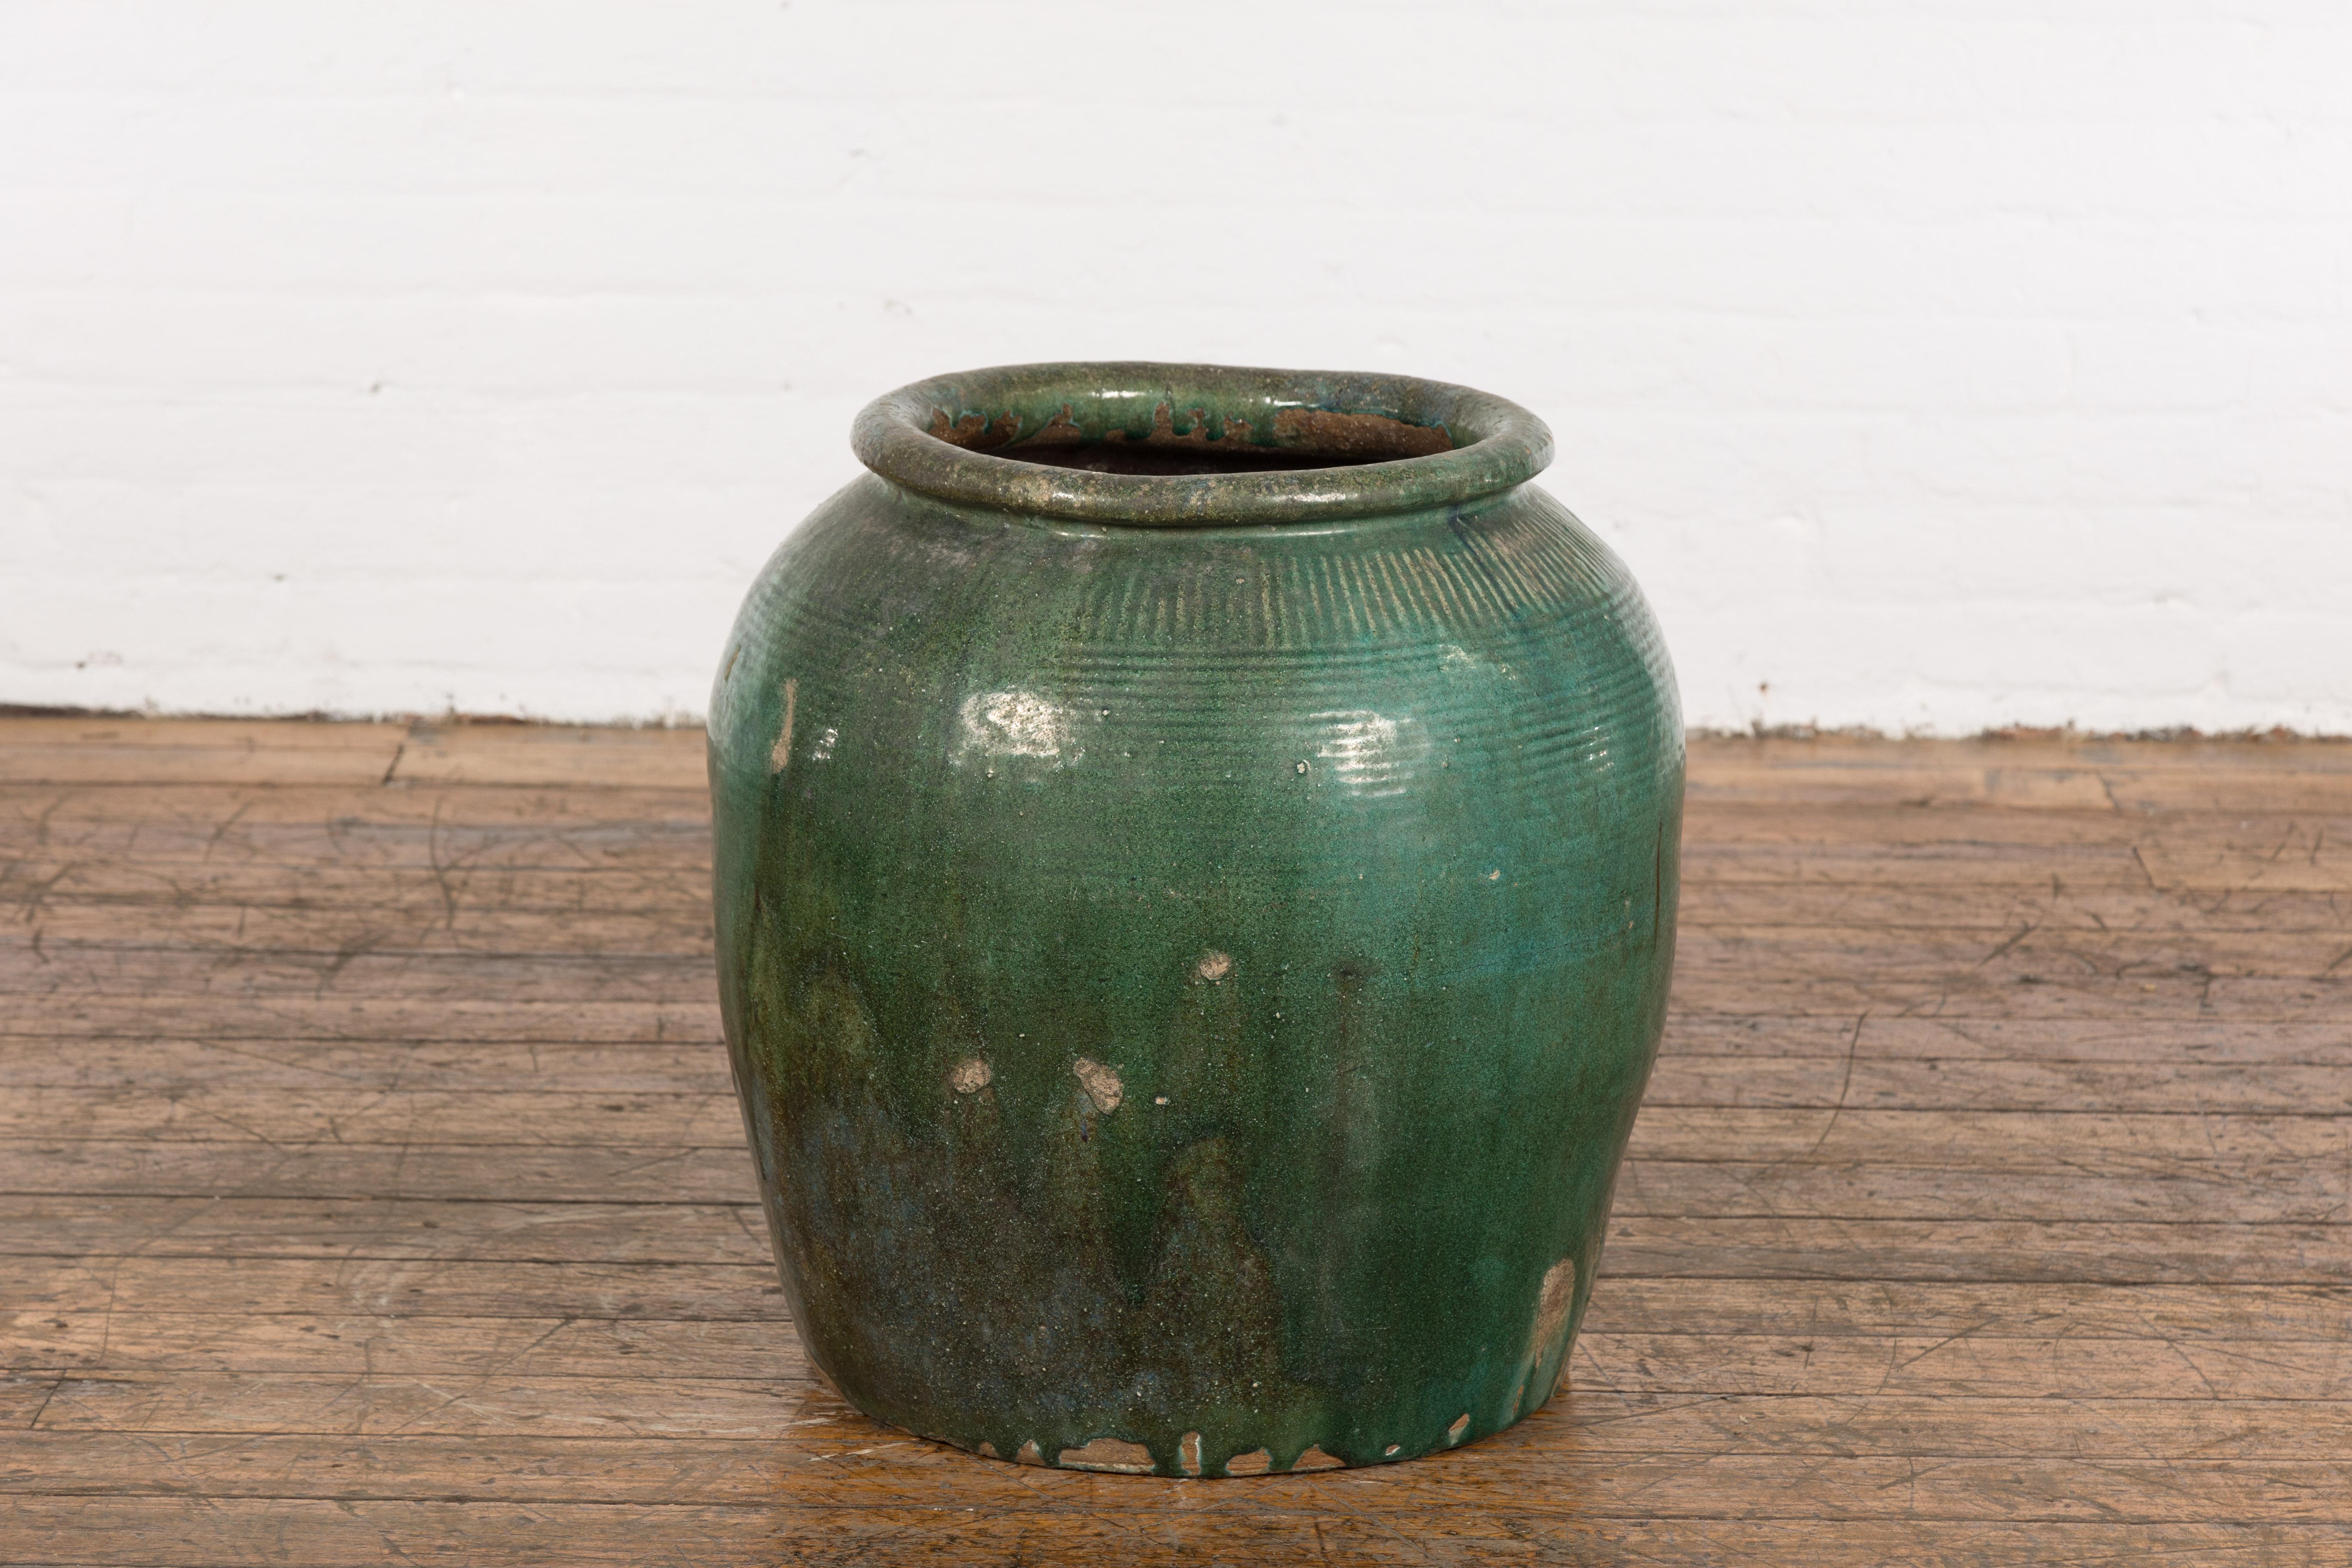 A large Chinese green glazed ceramic planter from the mid 20th century with large lip, striated décor and nicely weathered appearance. Charming us with its large proportions and slightly weathered appearance revealing its age and use, this green